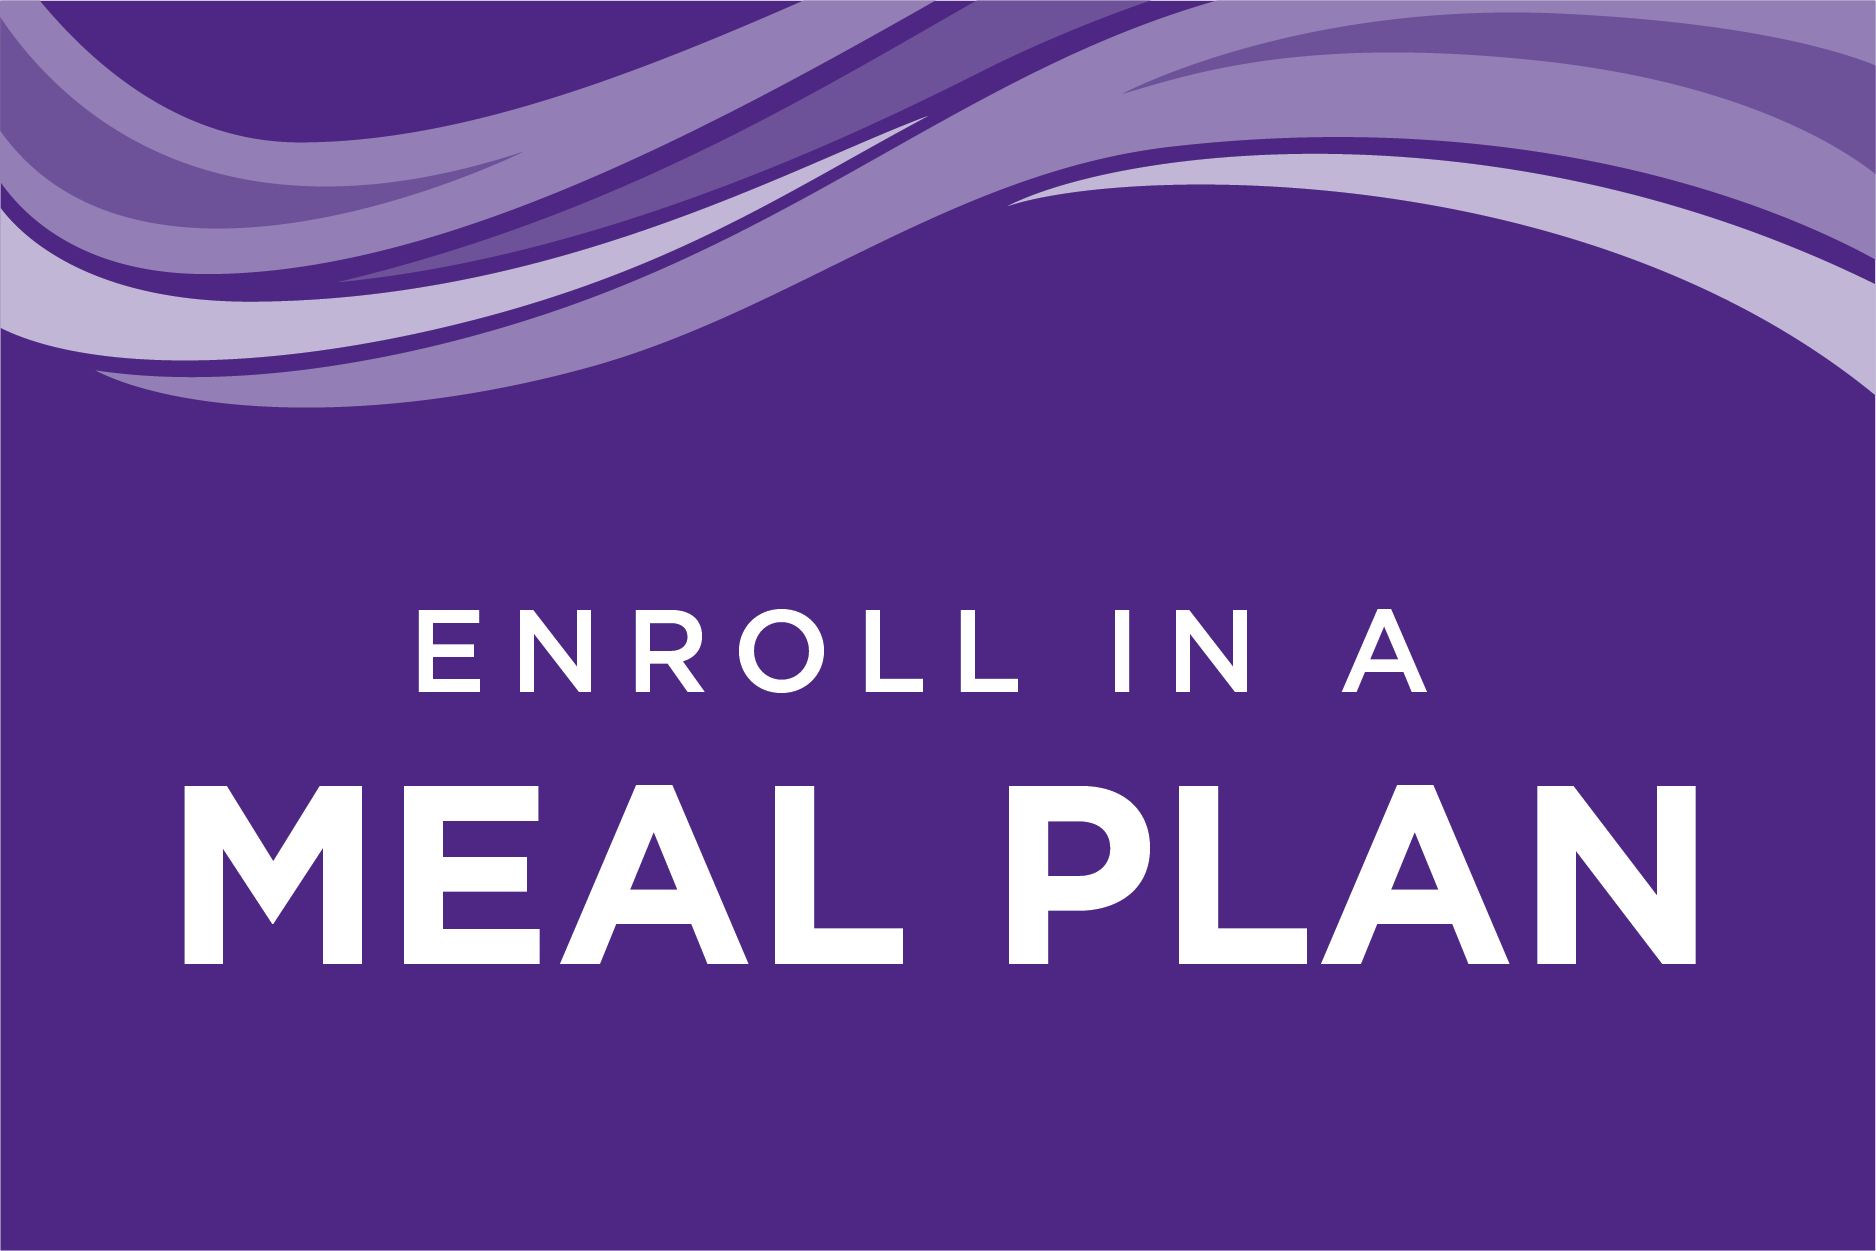 Enroll in a Meal Plan